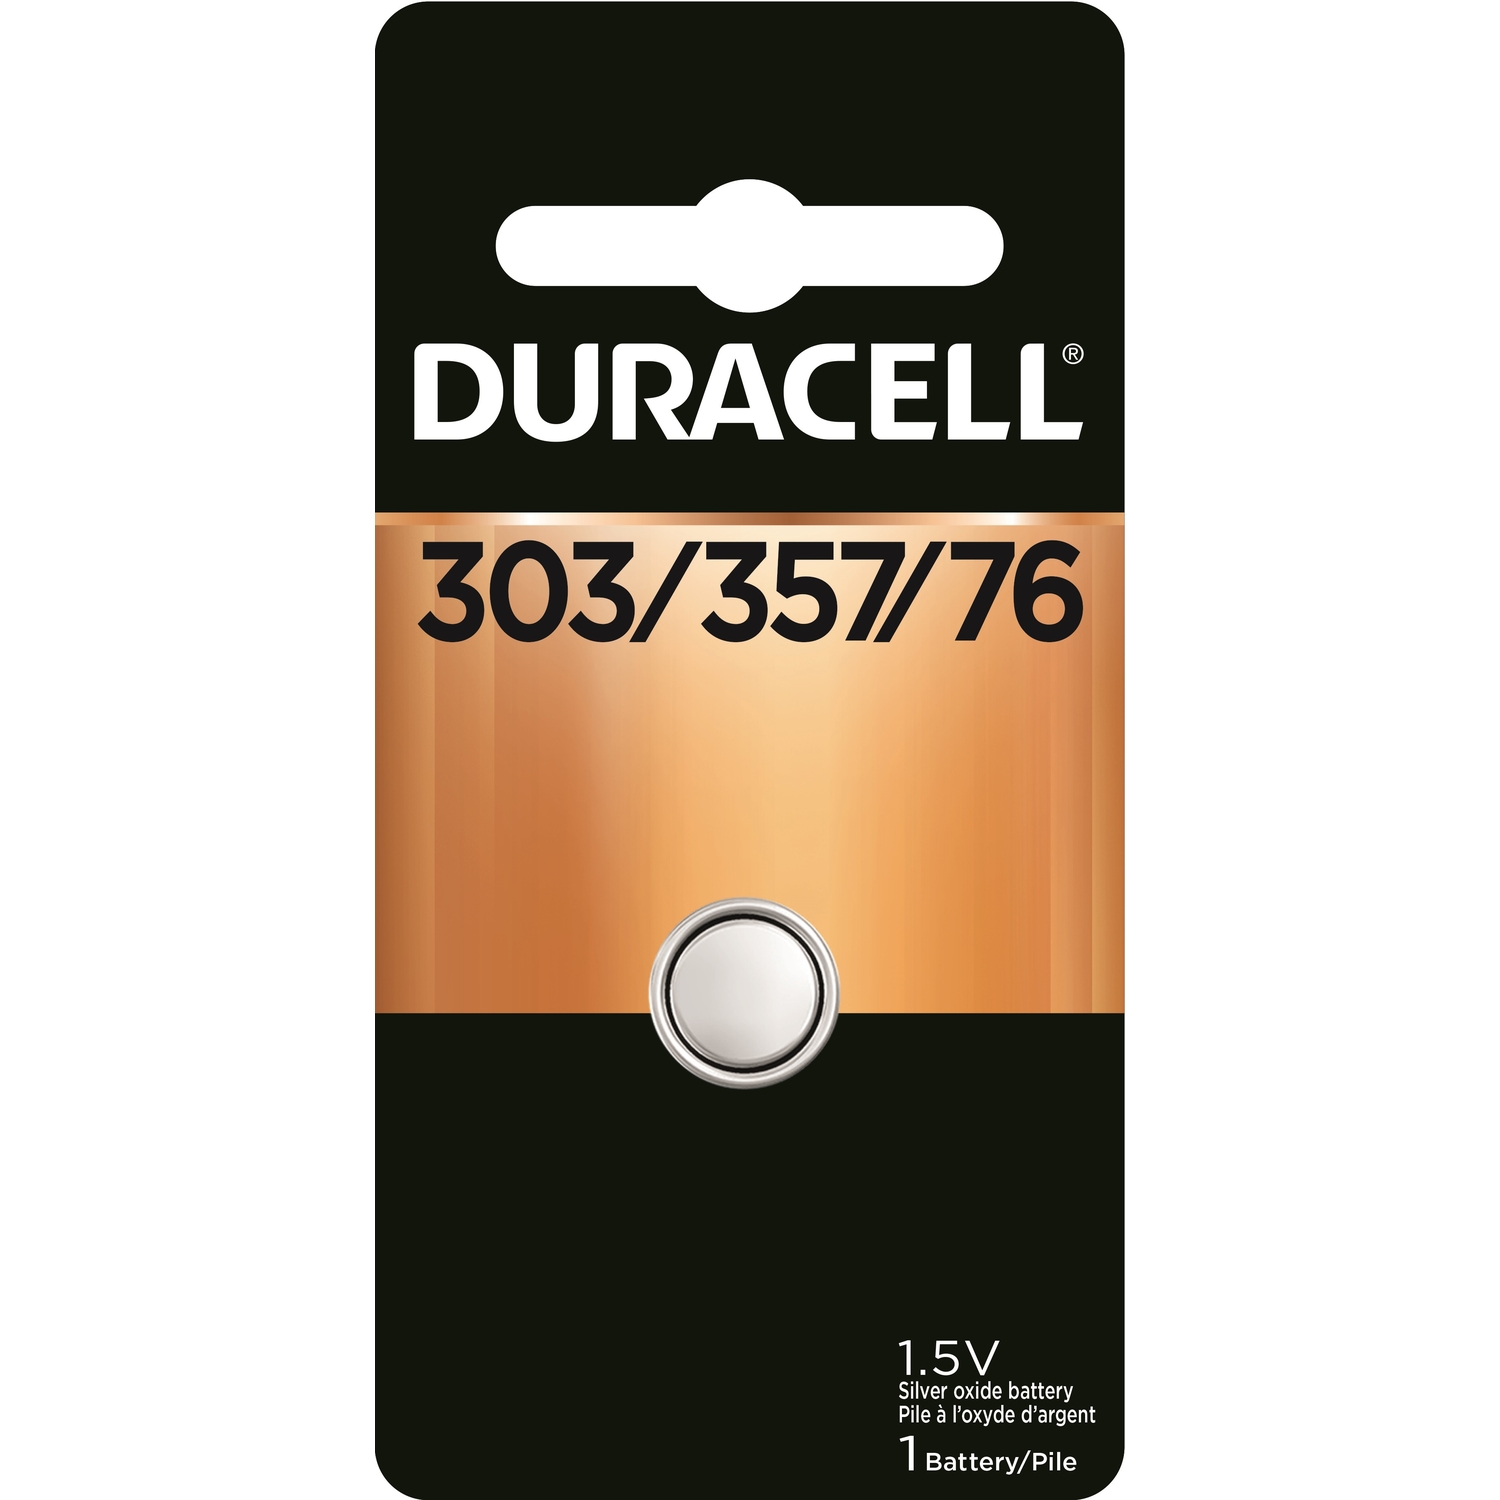 Duracell Silver Oxide 303/357/76 1.5 V 175 Ah Electronic/Watch Battery 1 pk